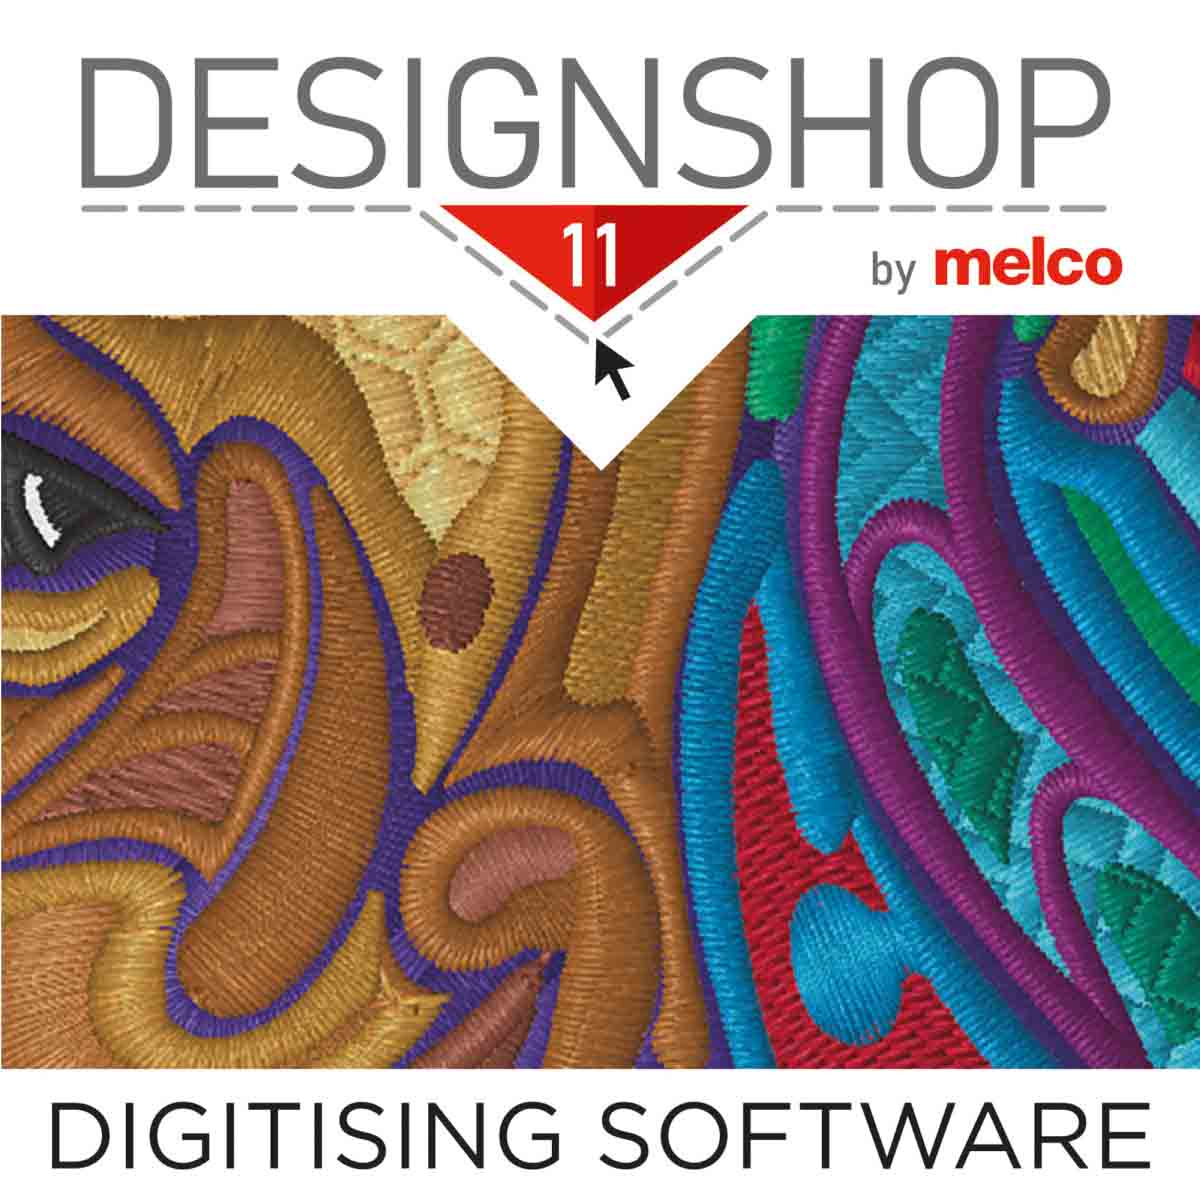 Buy Melco DesignShop V11 pro plus Software at Cheap Price on Fastestkey.com, Get the Best Deals on Embroidery Designs and Save your Money.